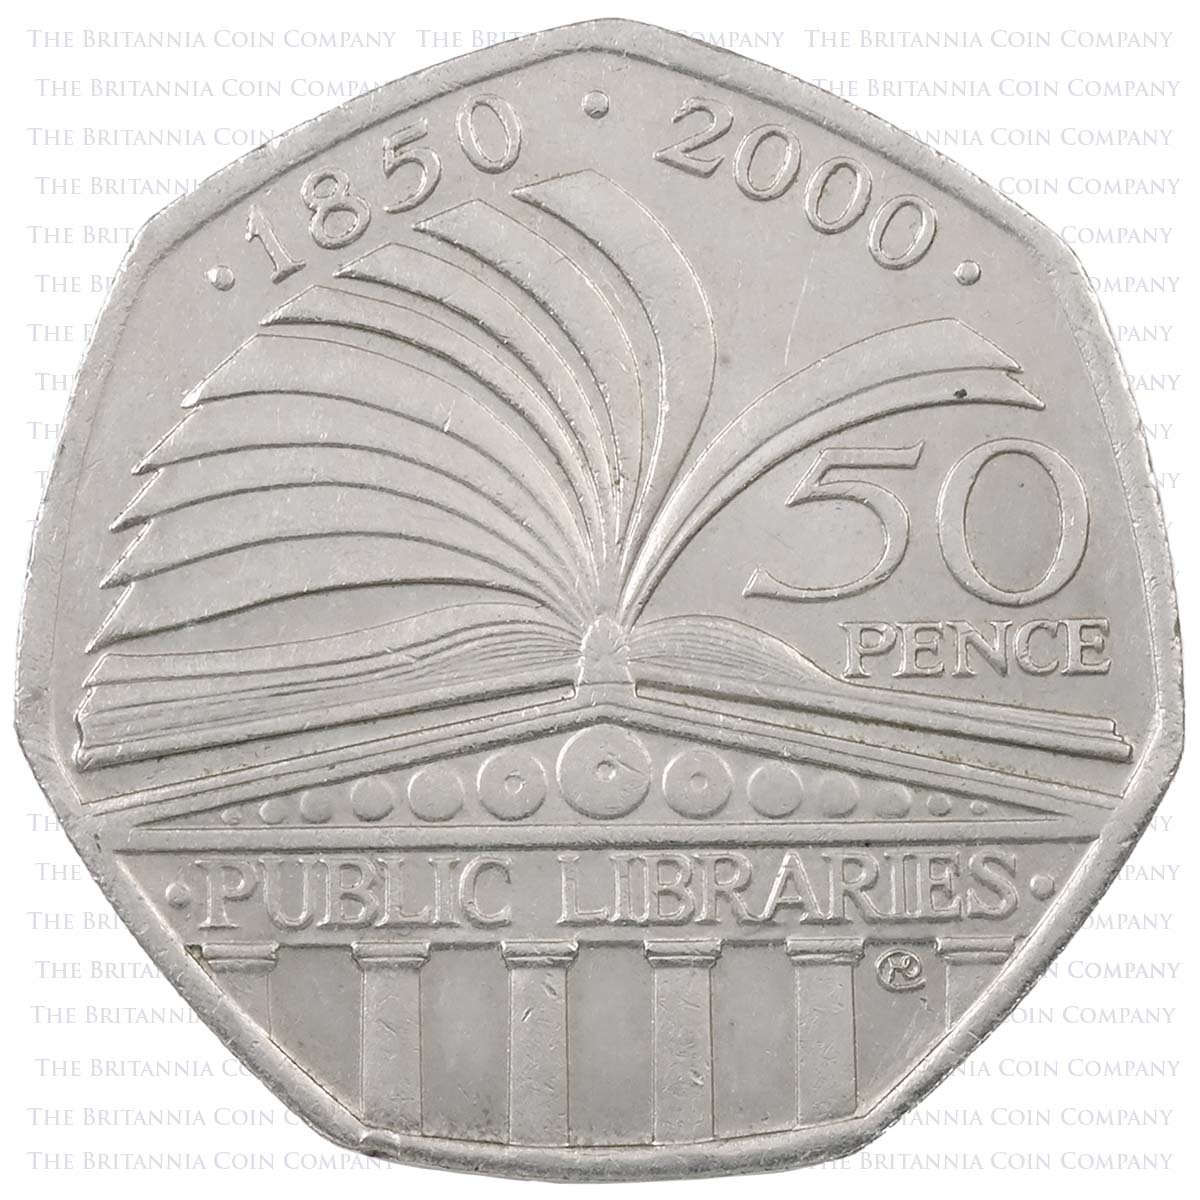 2000 Public Libraries Act Circulated Fifty Pence Coin Reverse